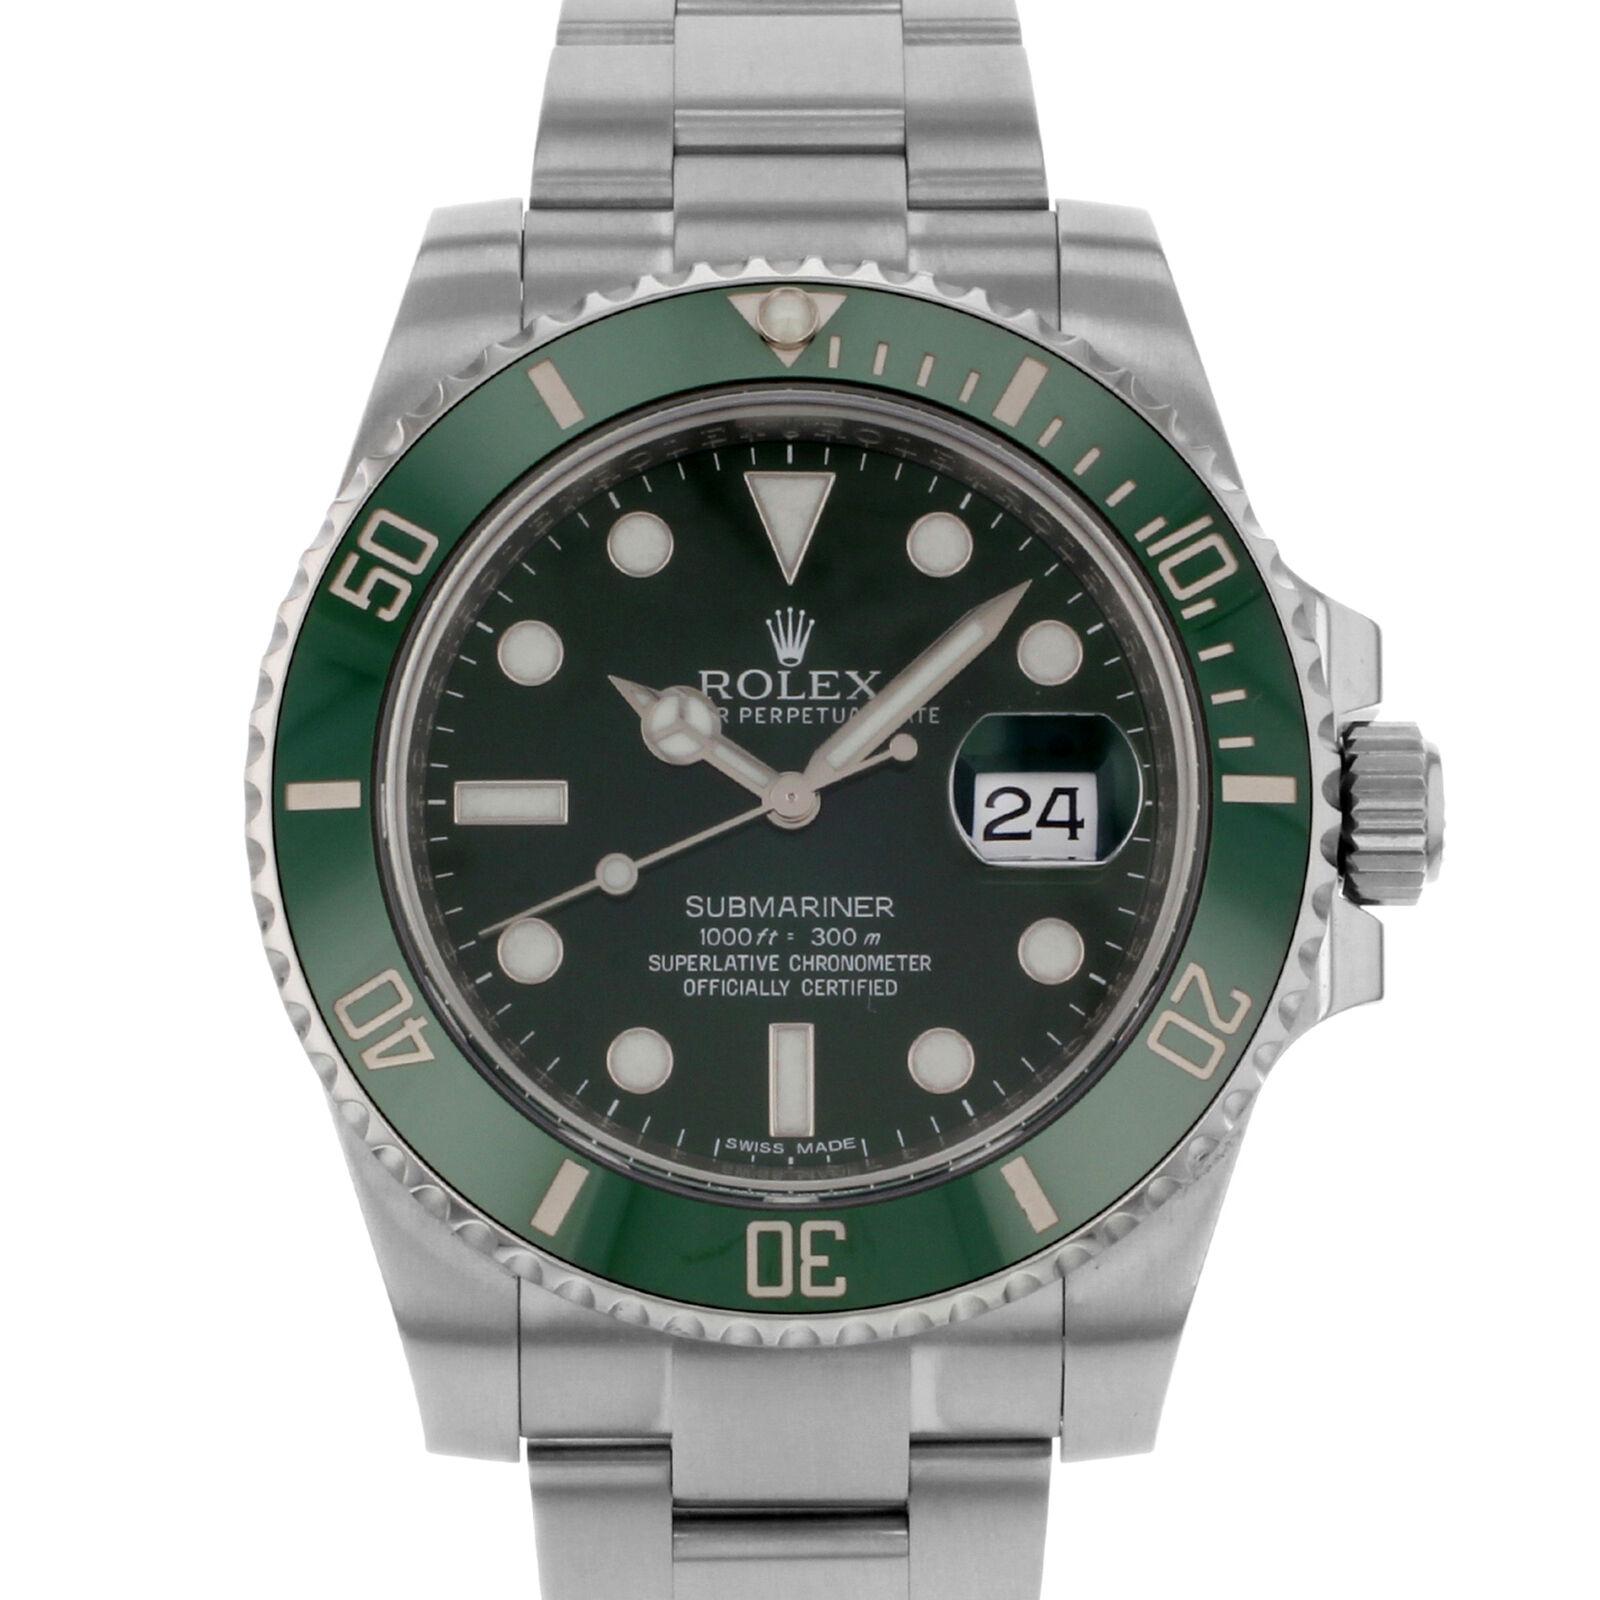 This never been worn Rolex Submariner 116610V is a beautiful men's timepiece that is powered by an automatic movement which is cased in a stainless steel case. It has a round shape face, date dial and has hand sticks & dots style markers. It is